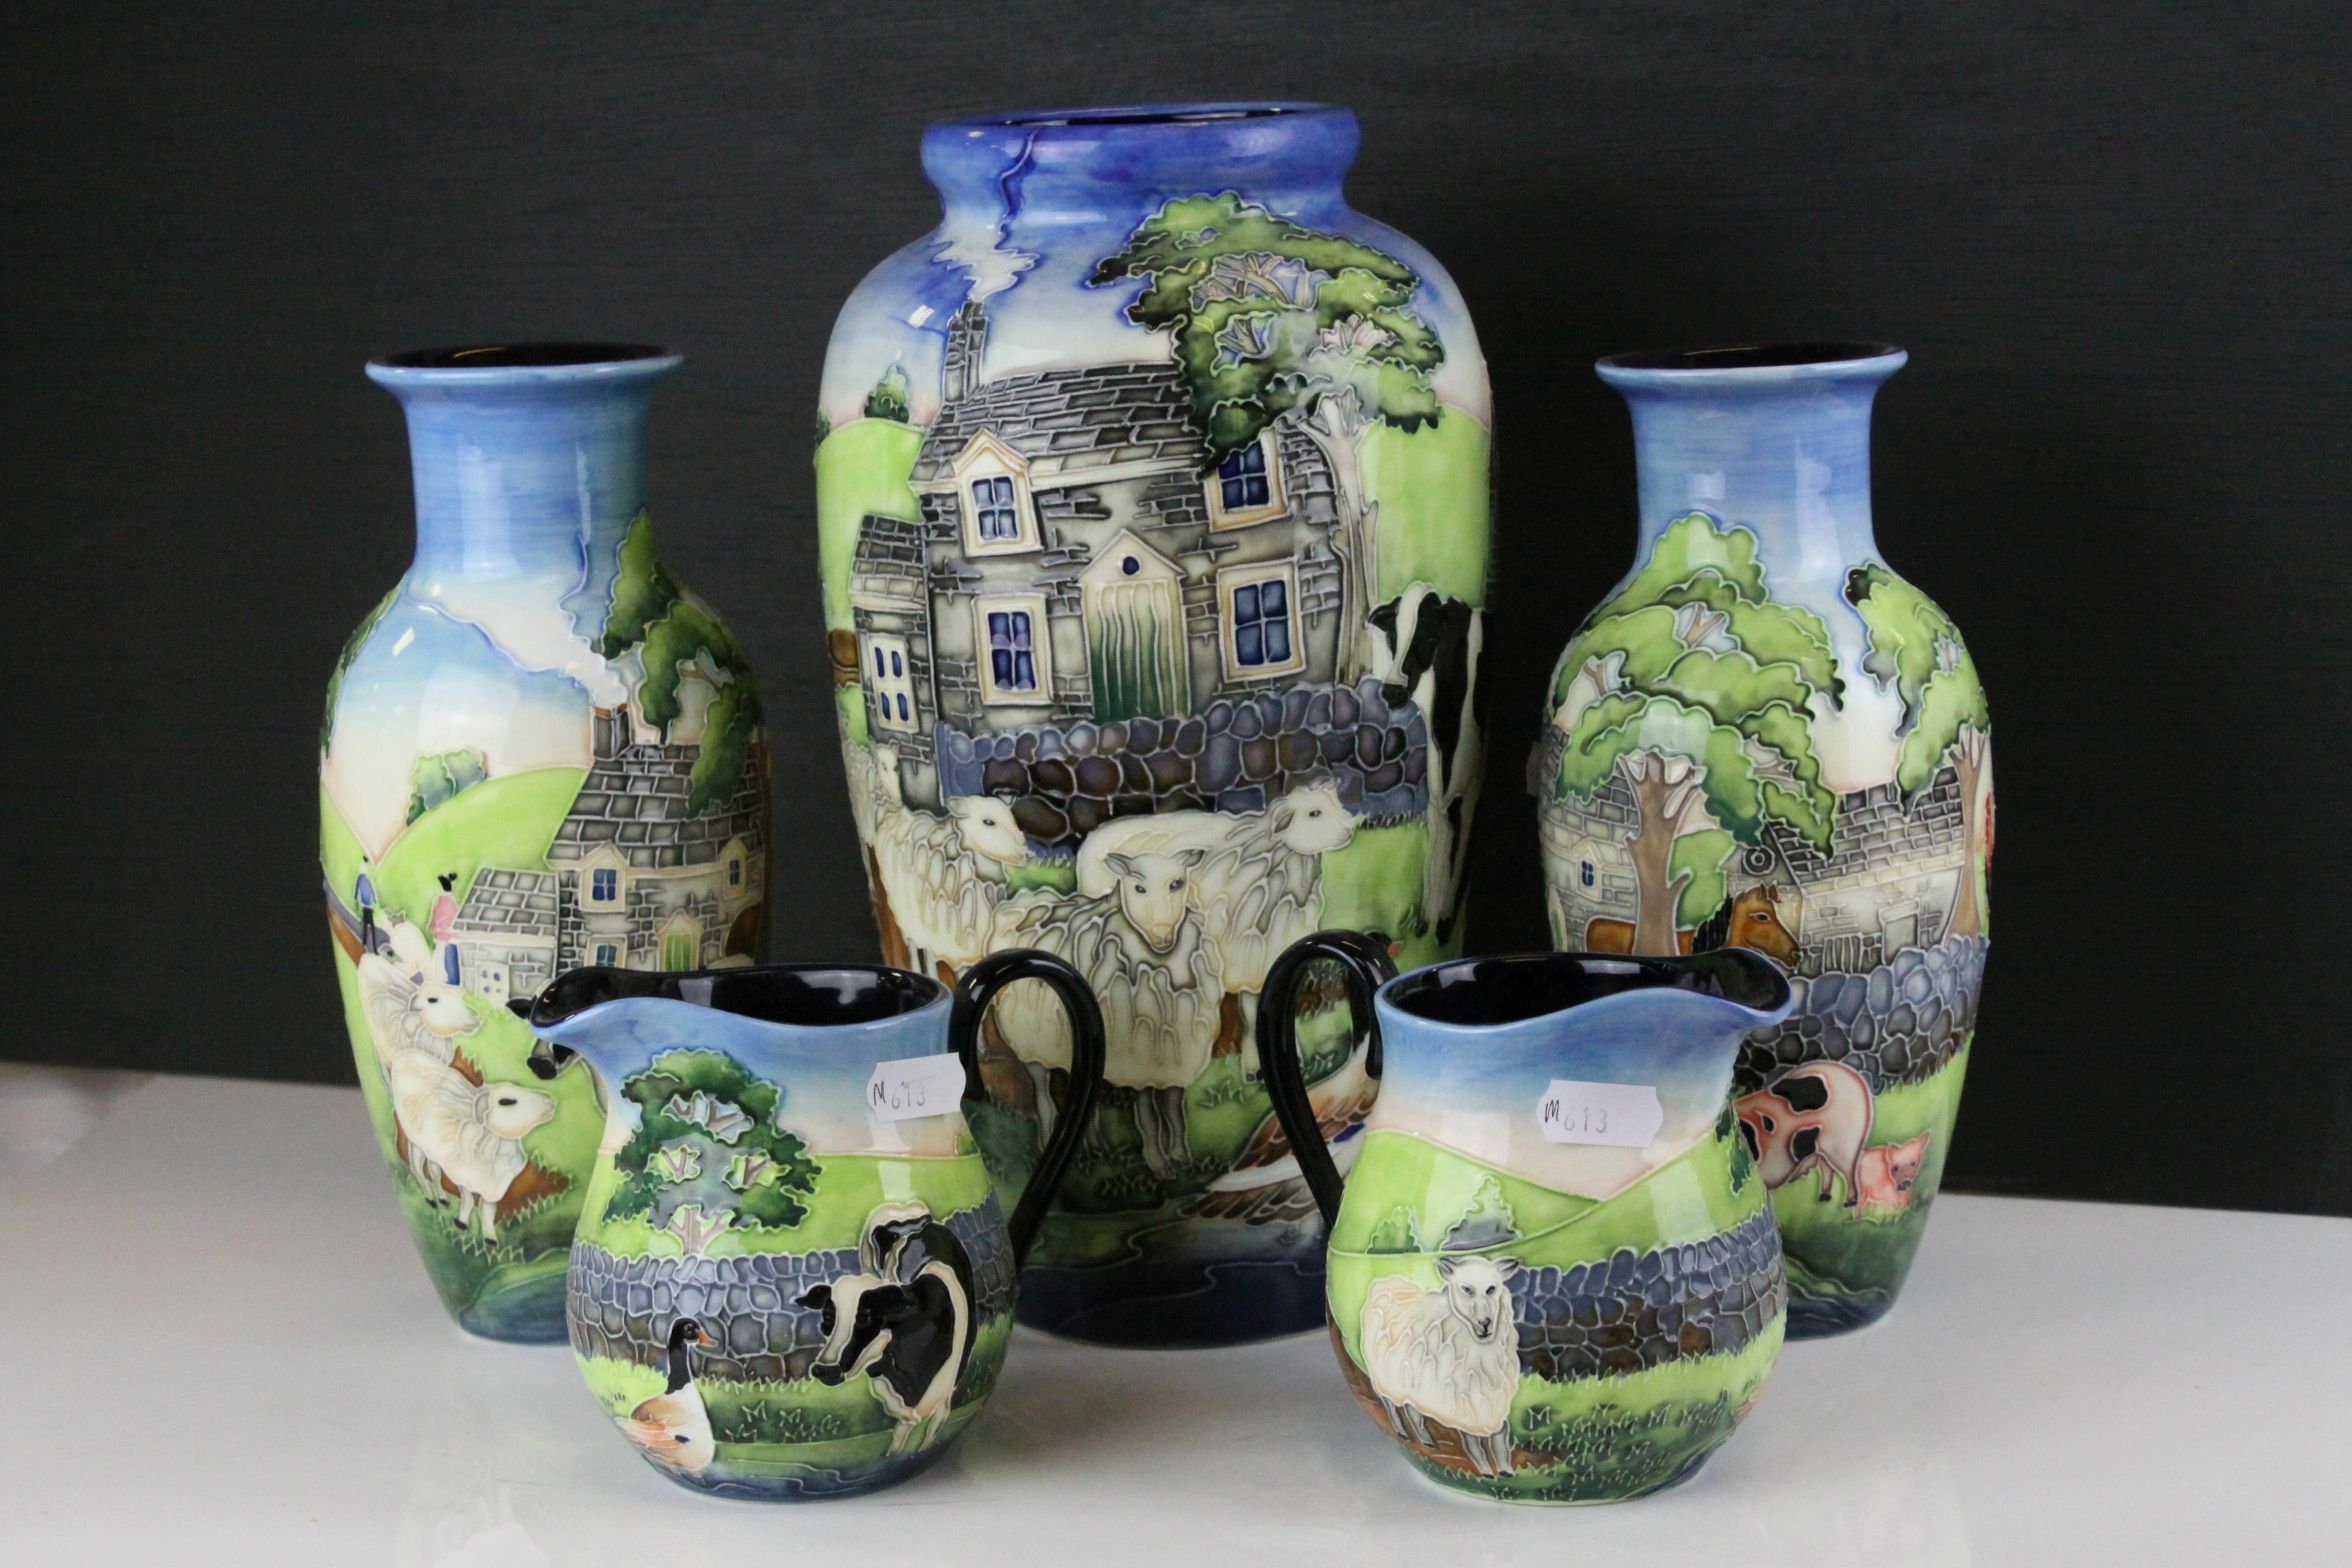 Old Tupton Ware - Collection of Three Vases and Two Jugs, all with Tube-lined decoration of Farm